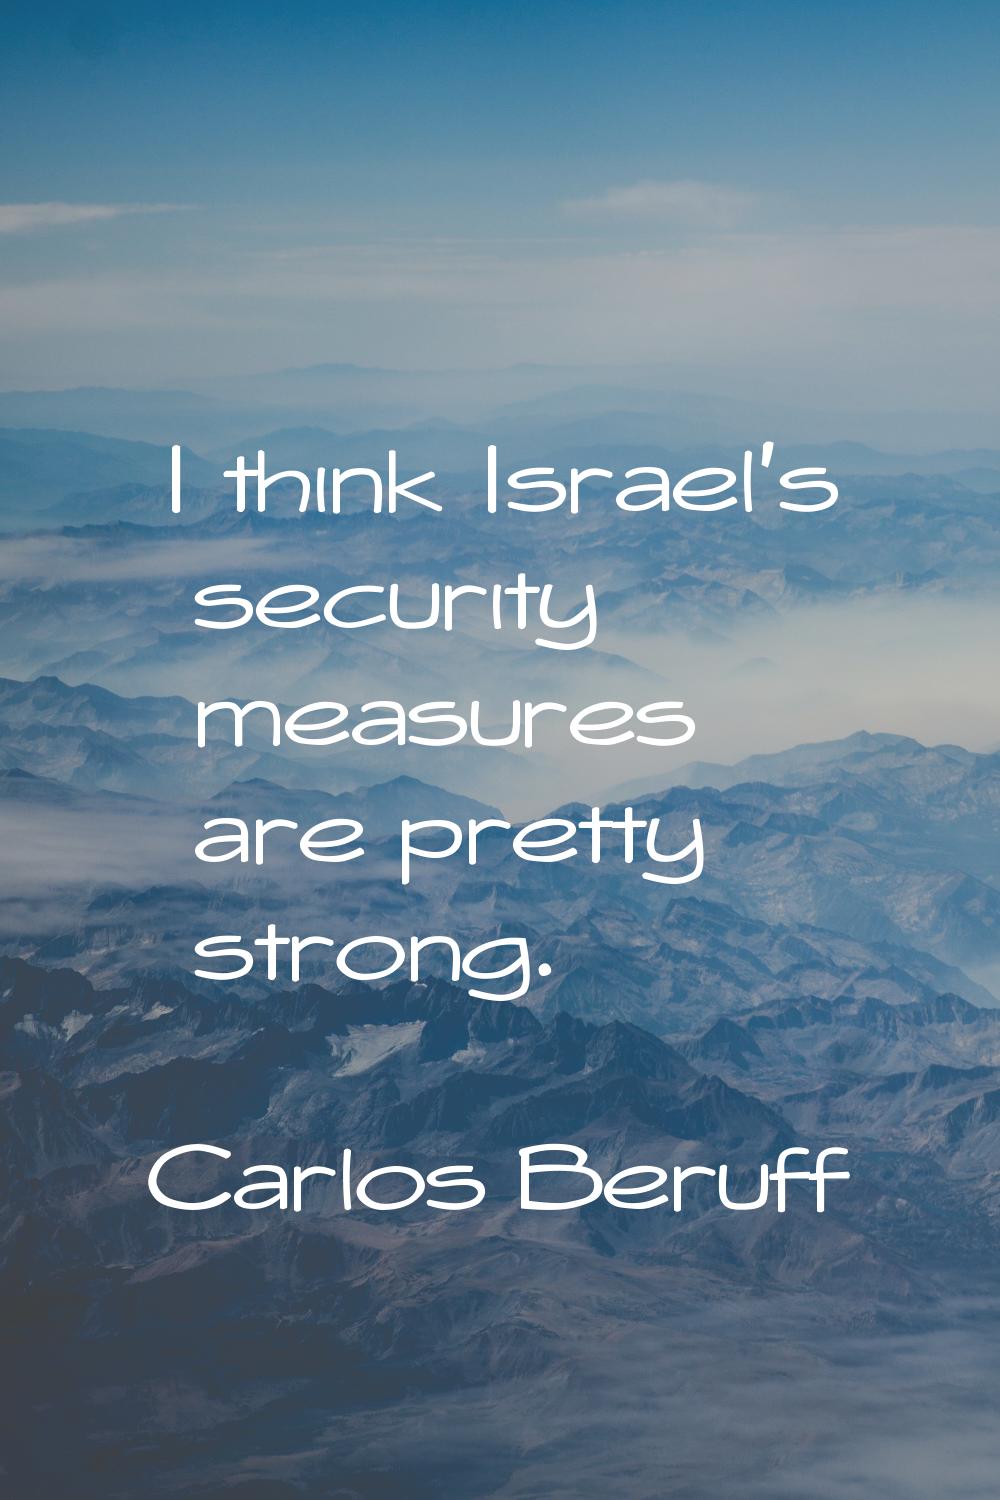 I think Israel's security measures are pretty strong.